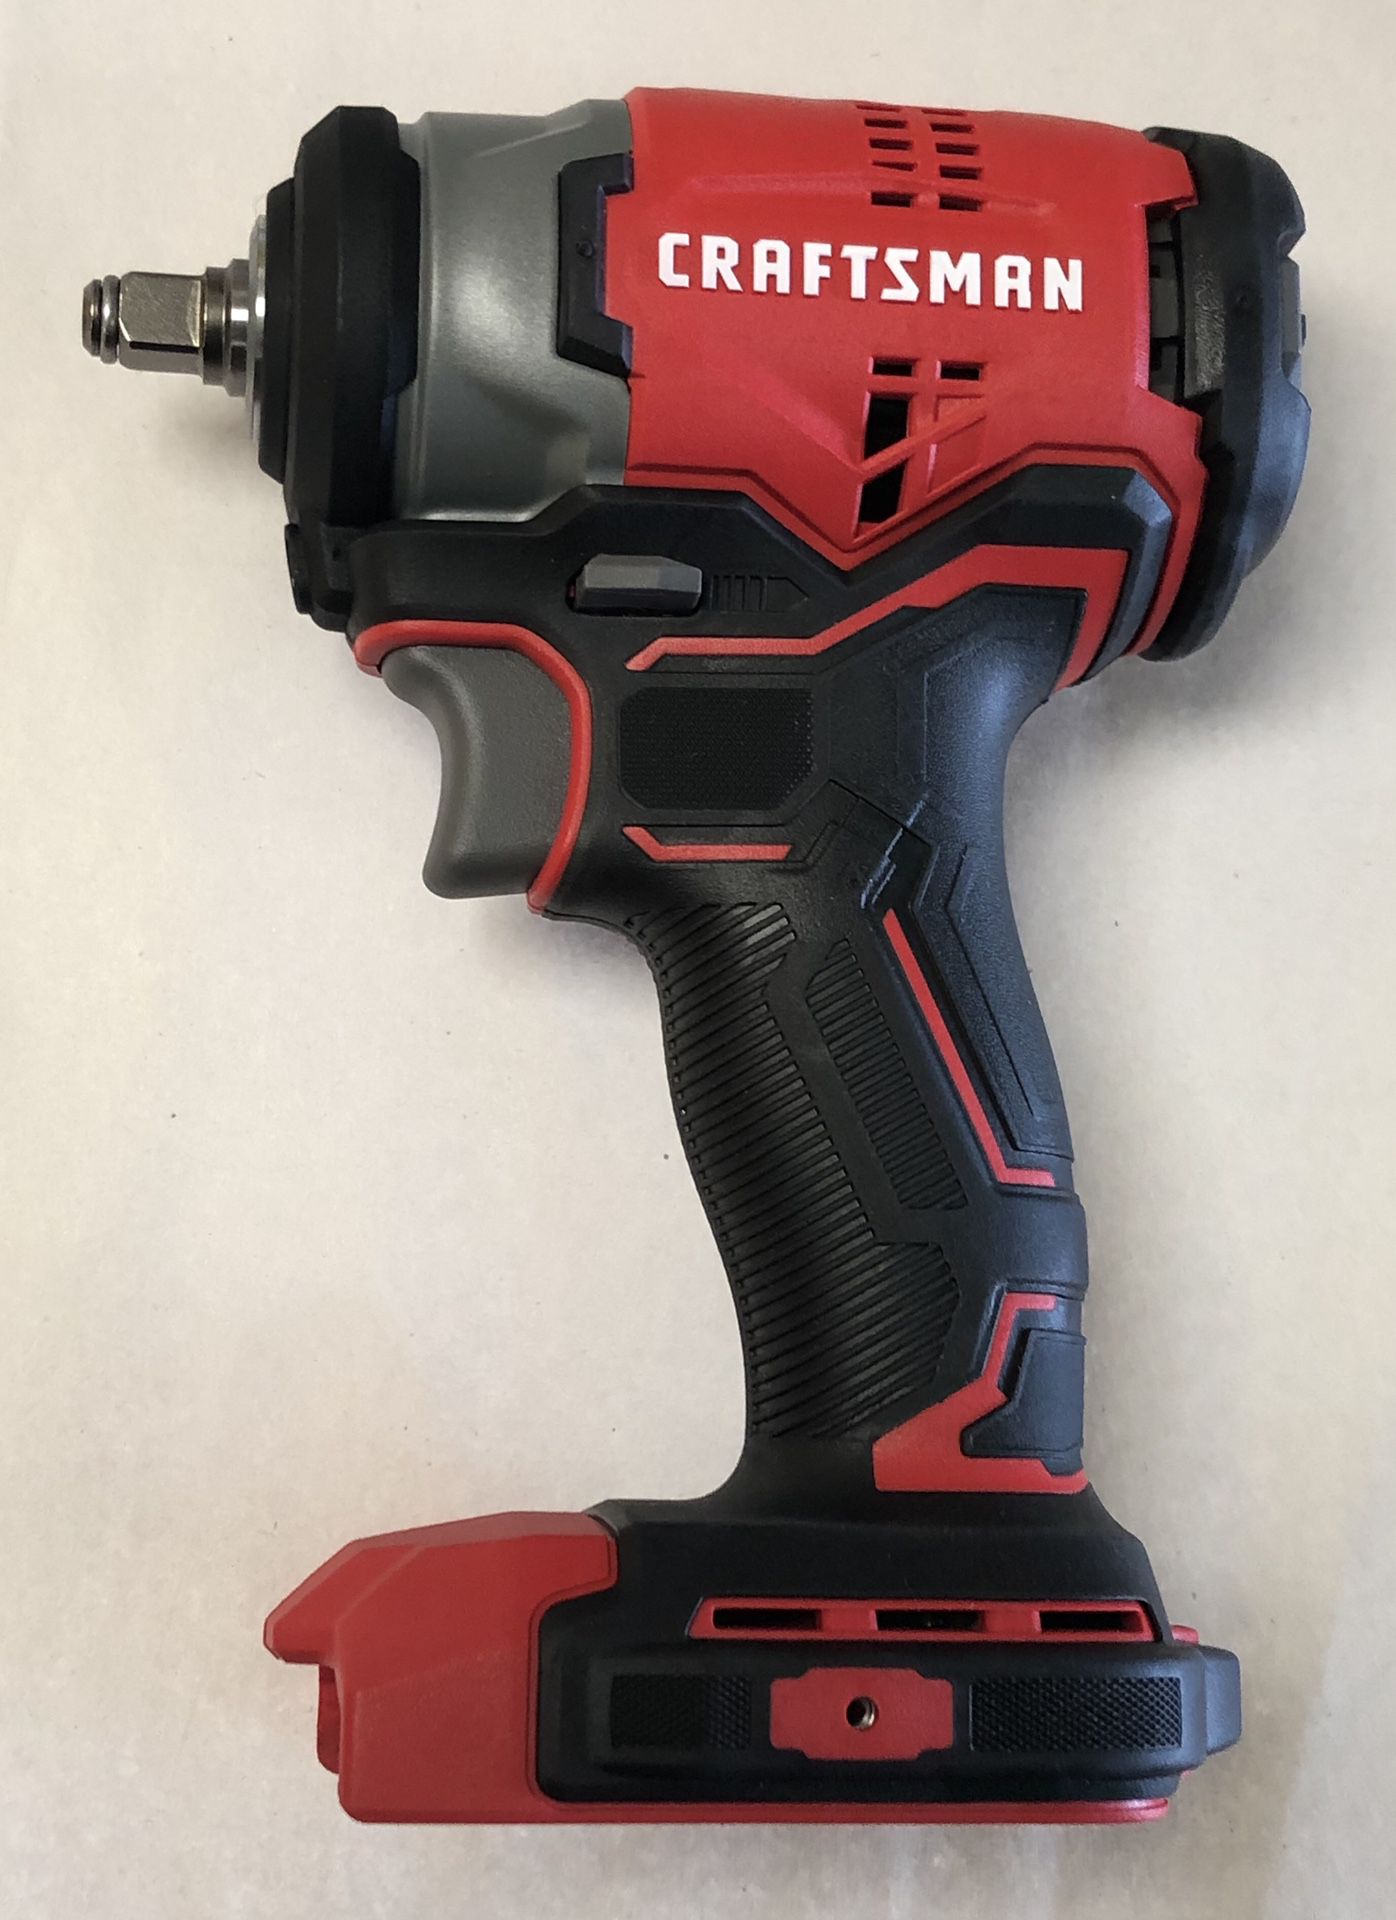 CRAFTSMAN 20V 3/8 In Drive Cordless Impact Wrench - CMCF910B - BRAND NEW NEVER BEEN USED